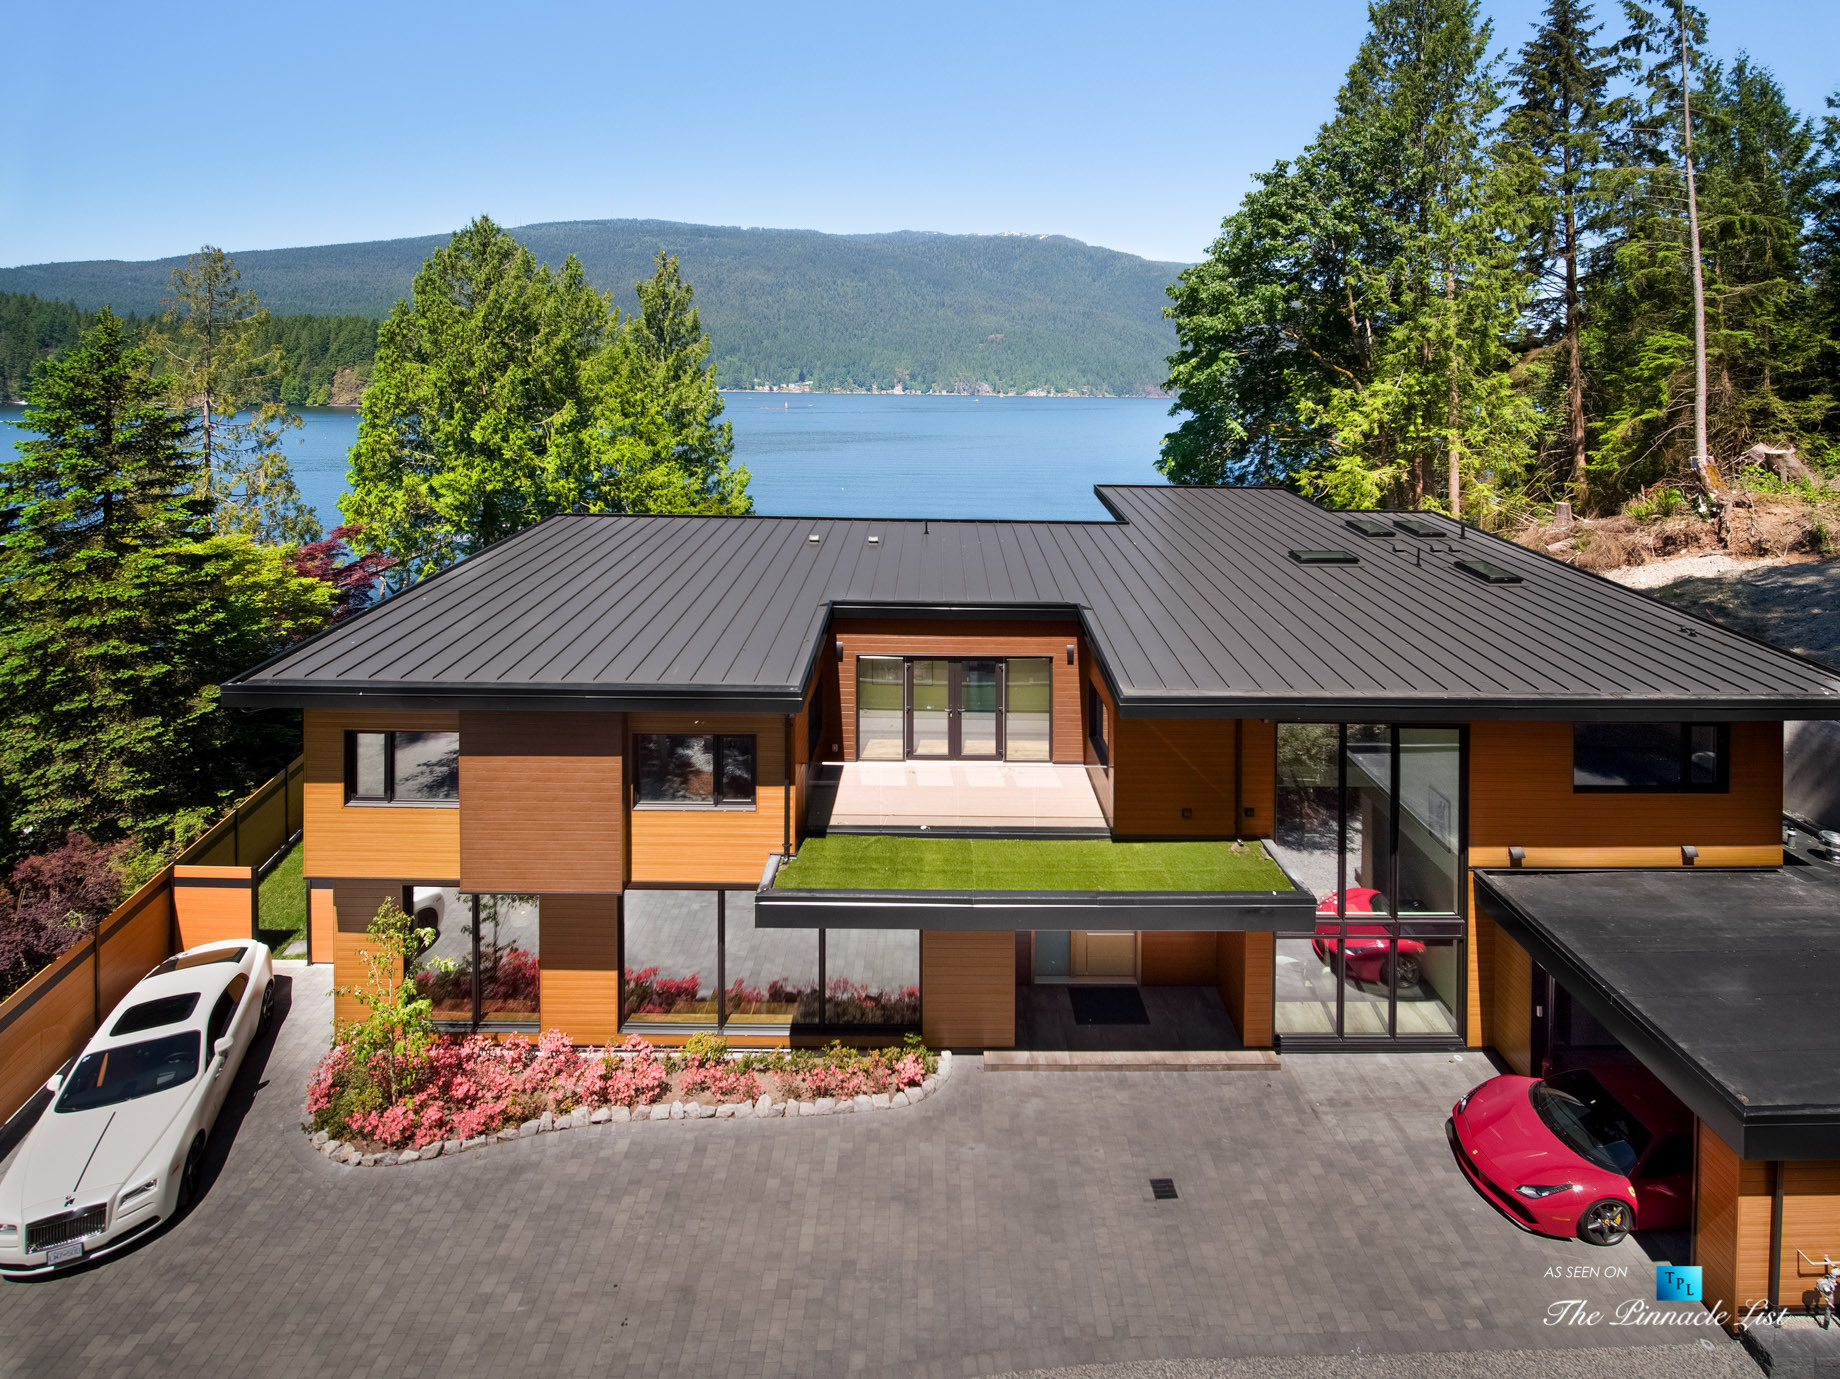 3350 Watson Rd, Belcarra, BC, Canada – Vancouver Luxury Real Estate – Modern Oceanfront Architectural Home with Red Ferrari and White Rolls-Royce